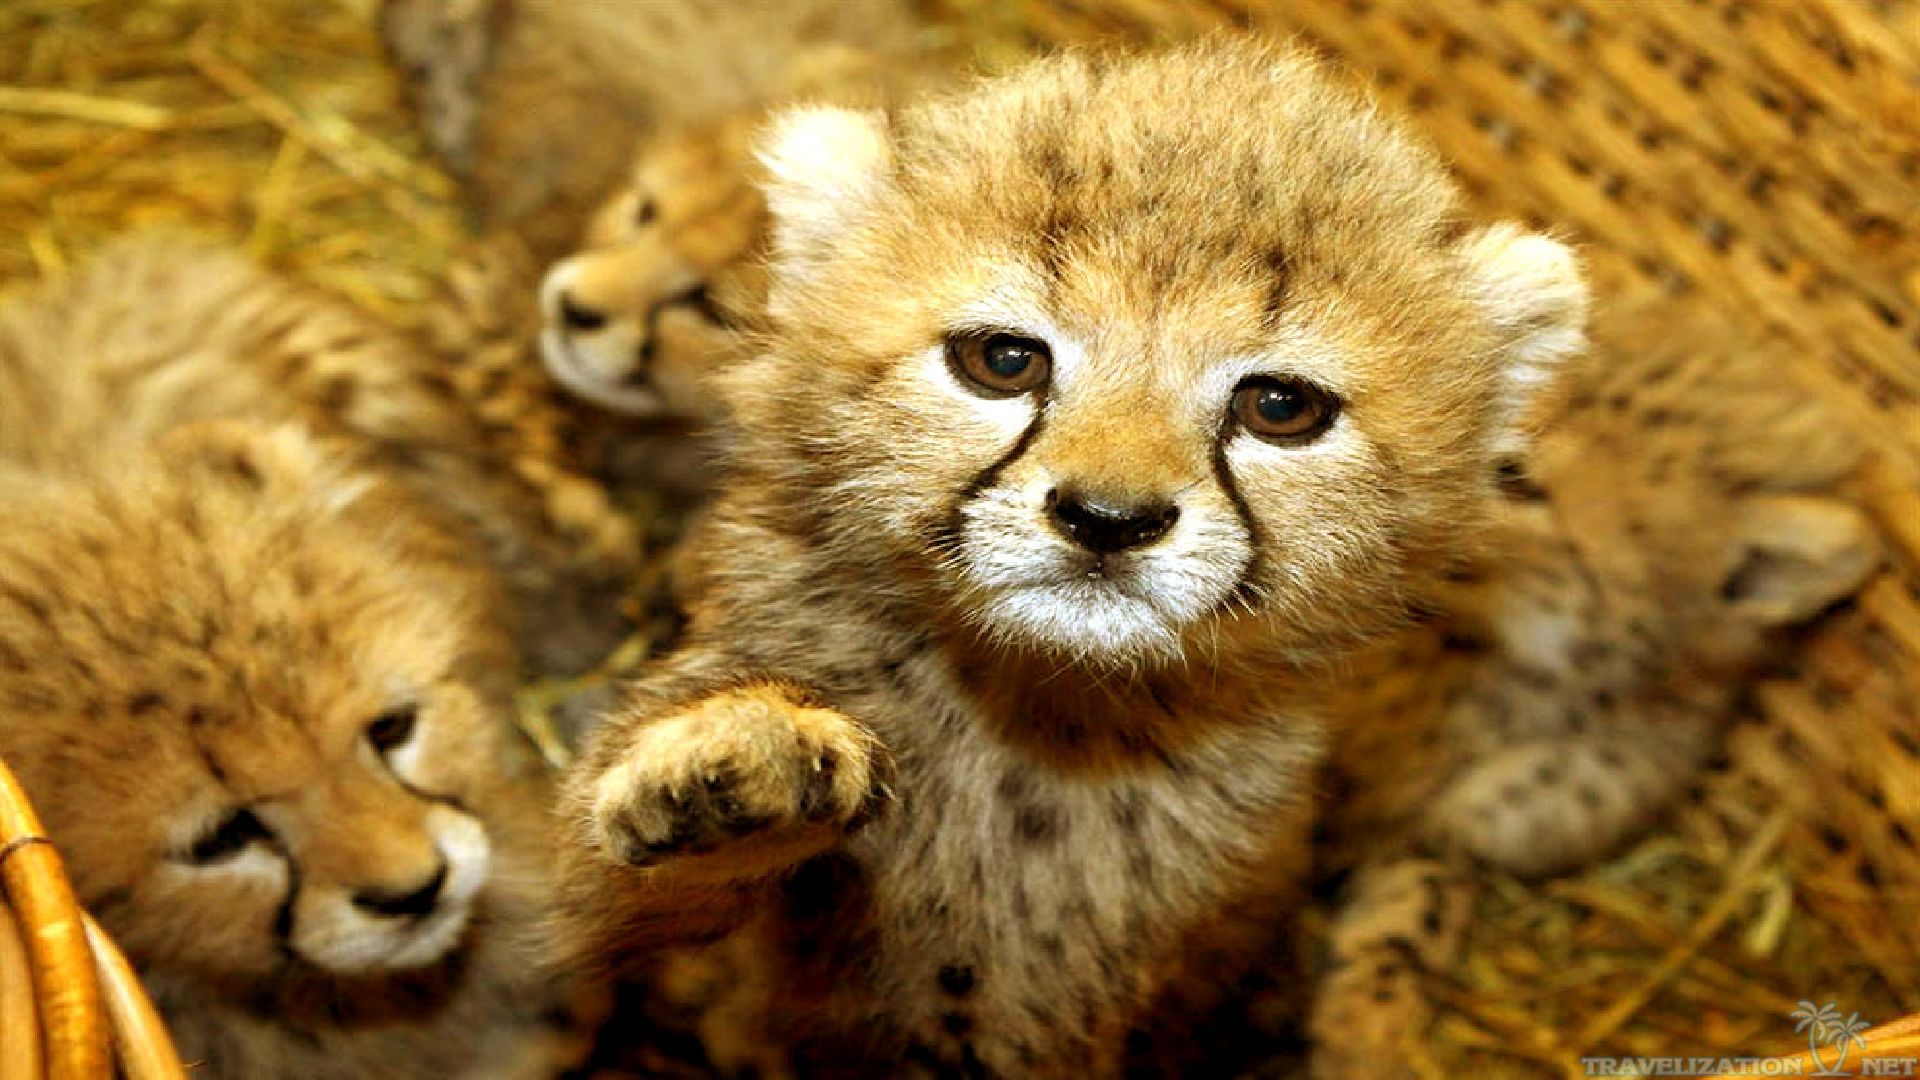 Gallery For gt Wild Baby Animal Wallpaper